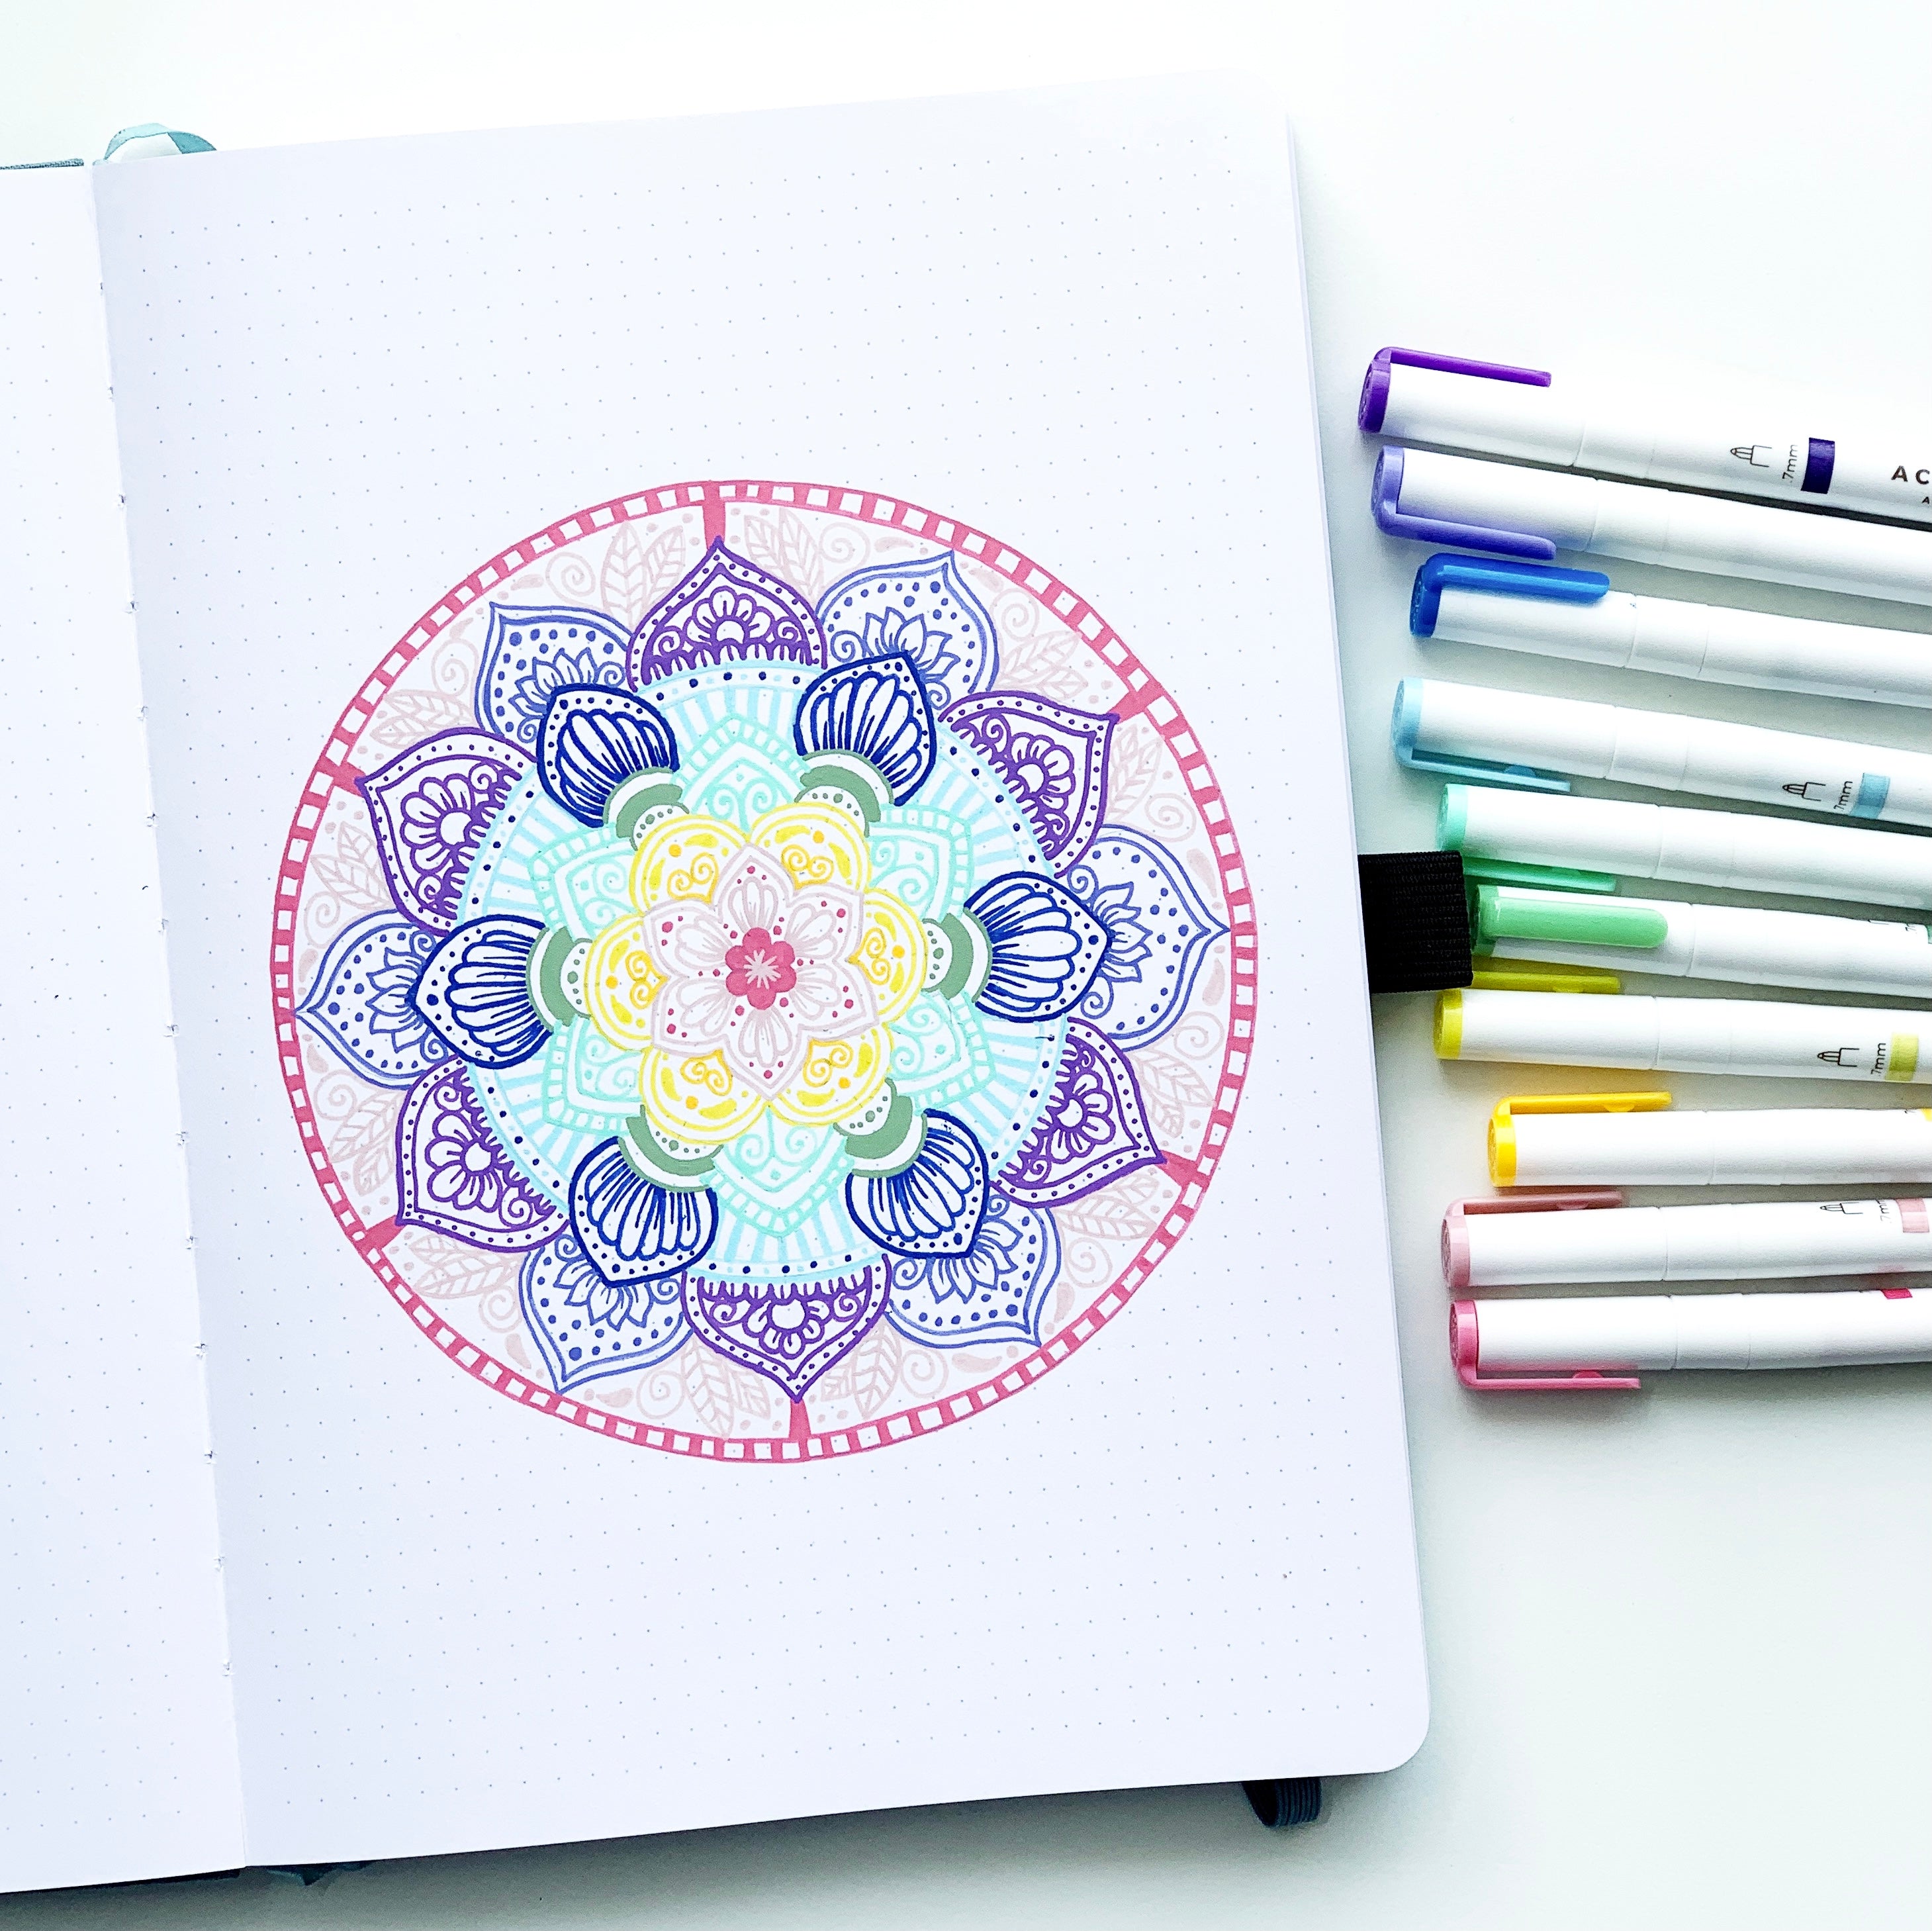 Learn how to draw a mandala using Archer and Olive Acrylograph Pens with Adrienne from @studio80design!